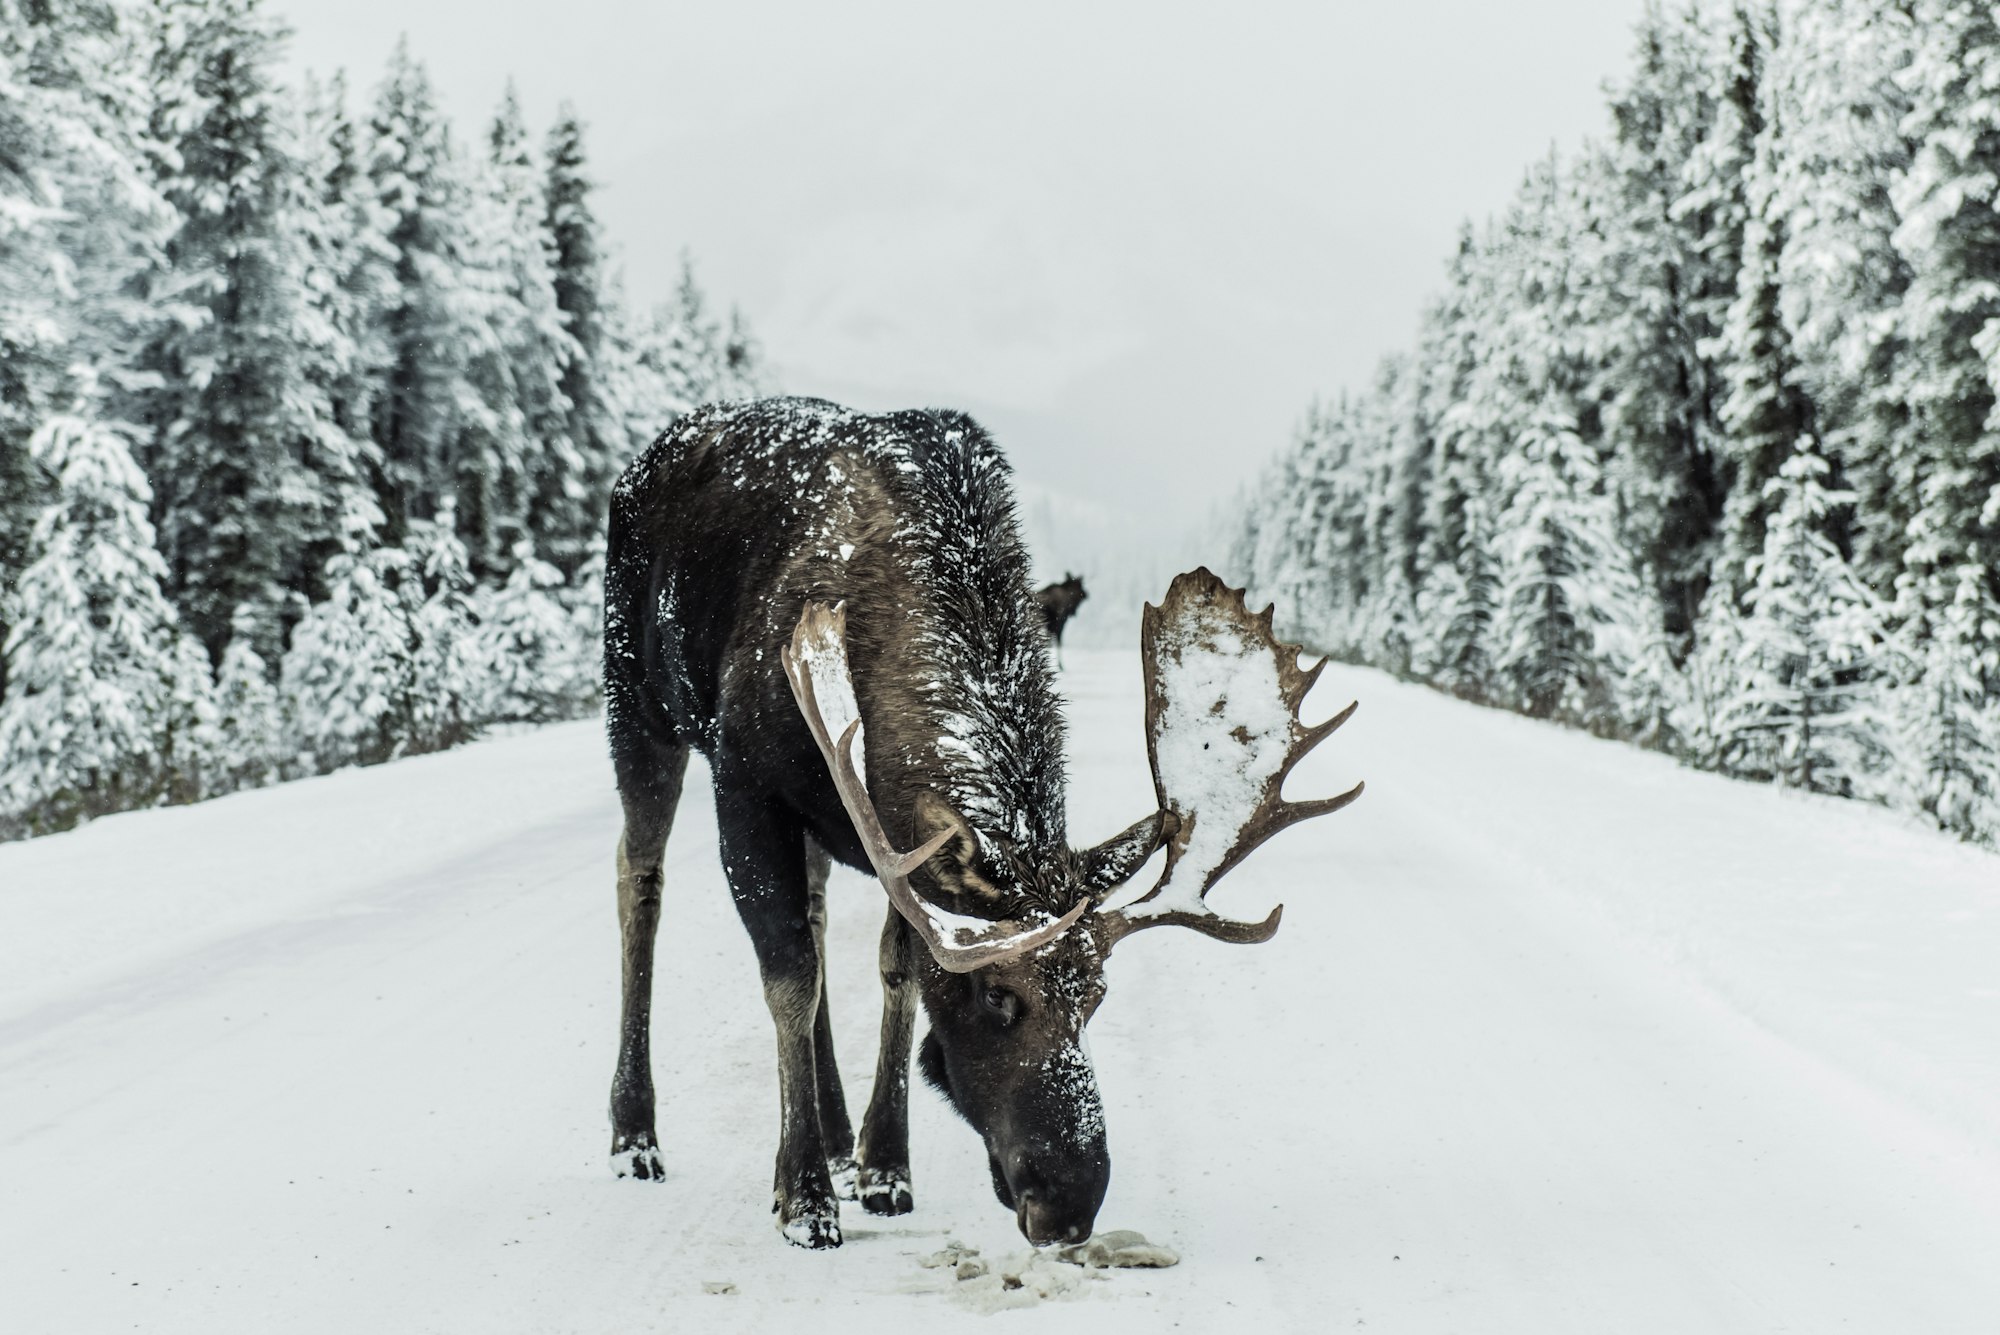 A moose eating the salty/gravel that gets sprayed on the roads during snowy winter